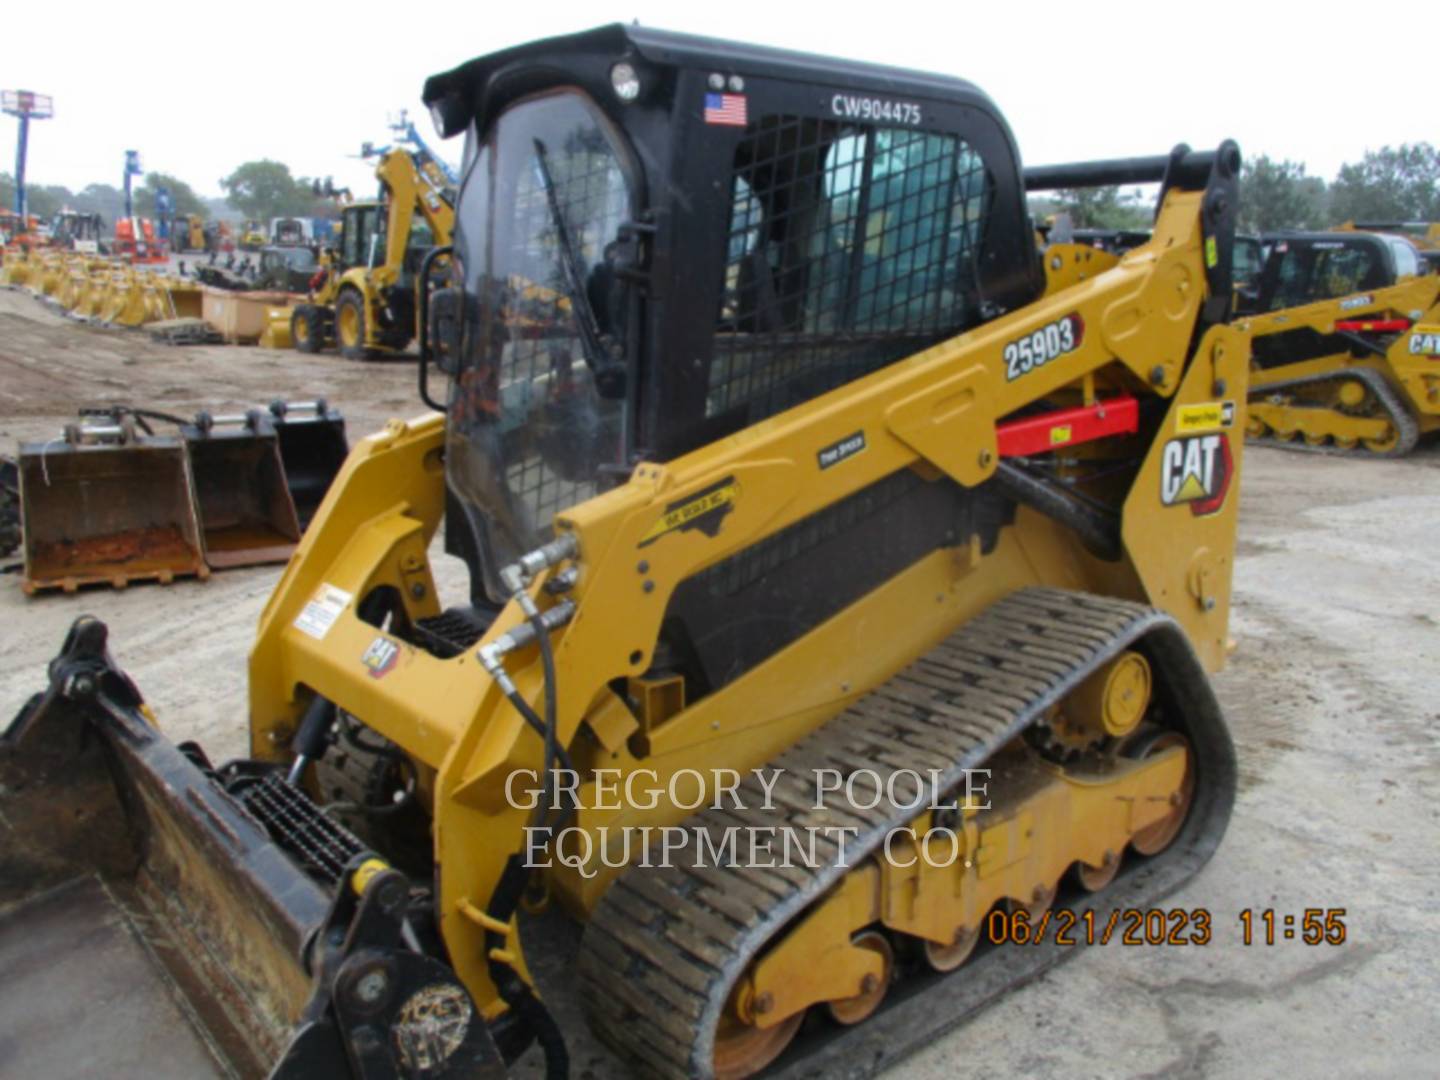 Caterpillar 259d3 Compact Track Loaders For Sale Construction